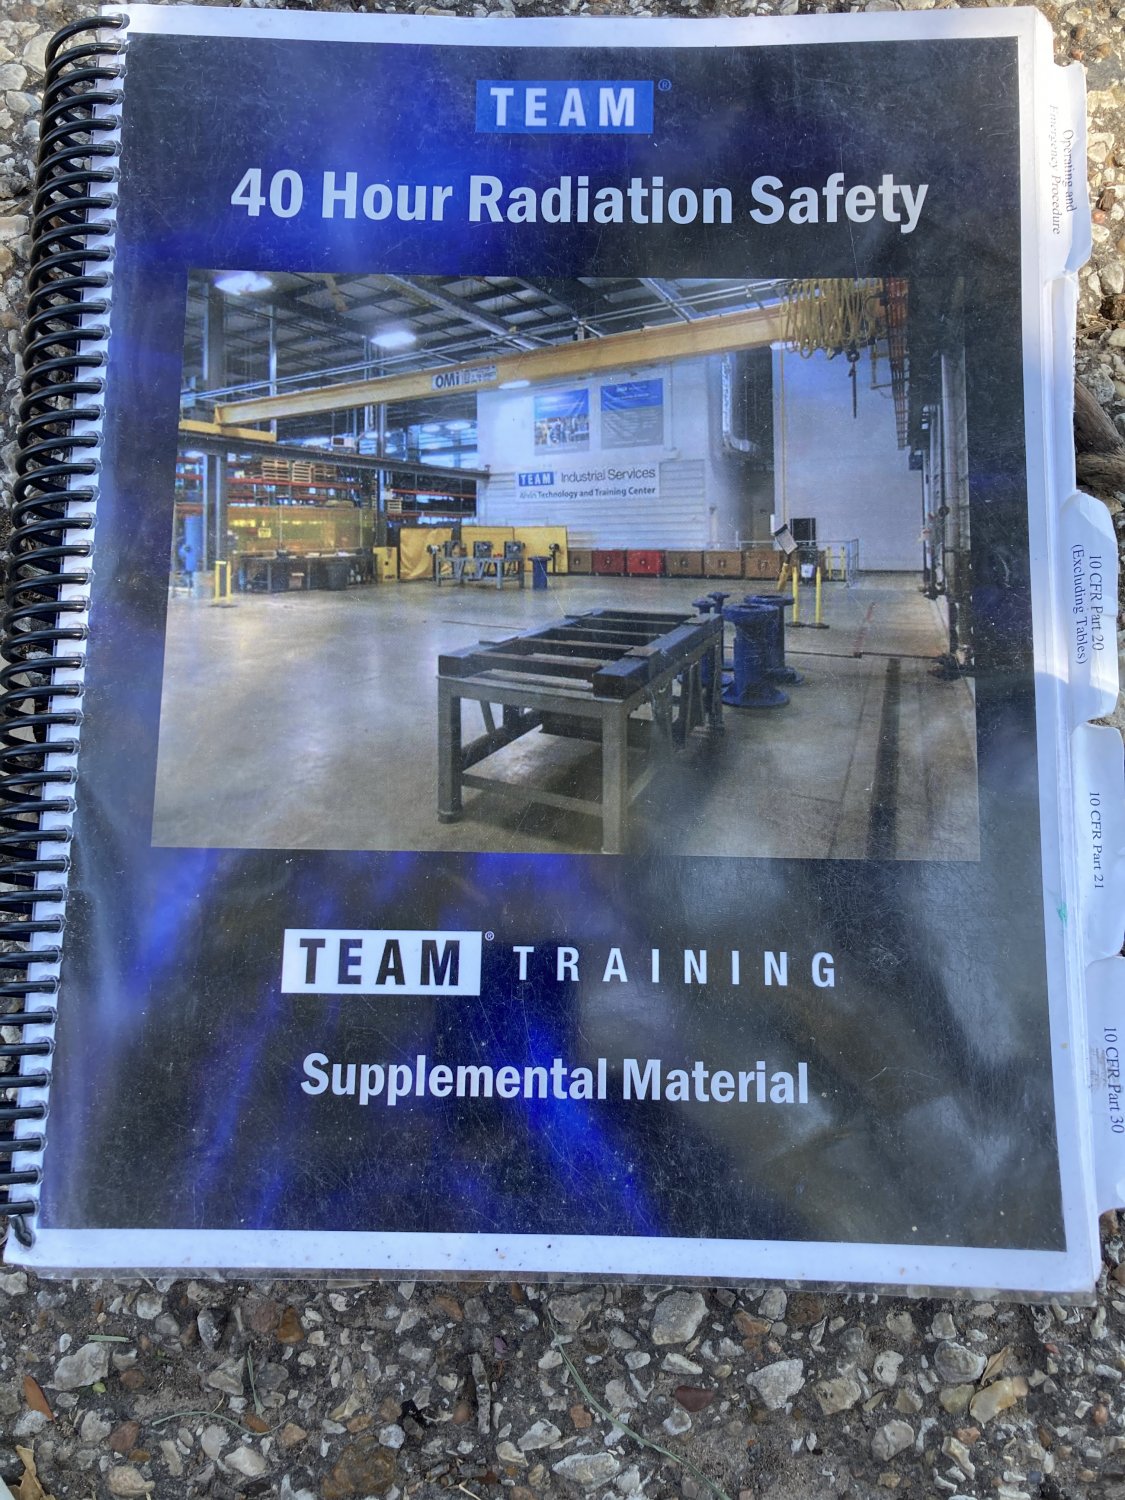 40 Hour Radiation Safety Team Training Supplemental Material Great Find